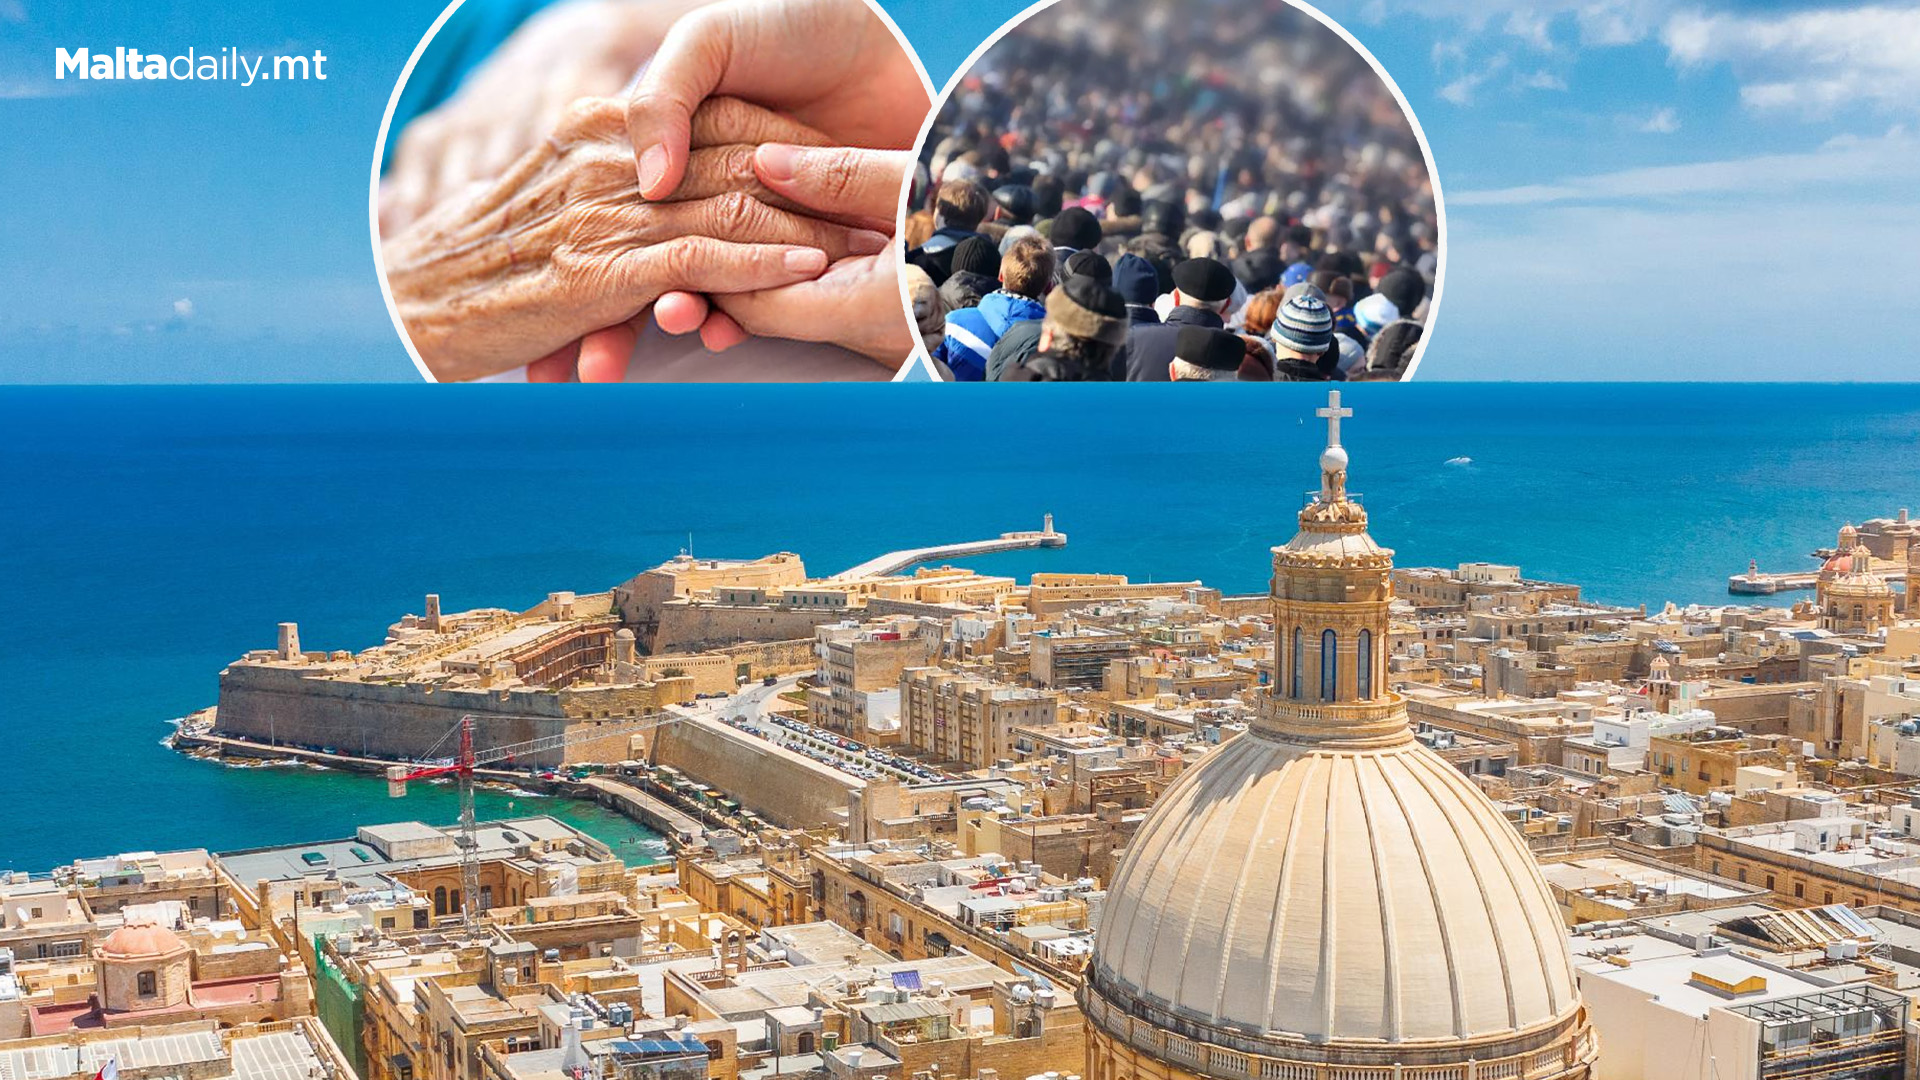 Malta's Population To Grow To Over 811,000 By 2070